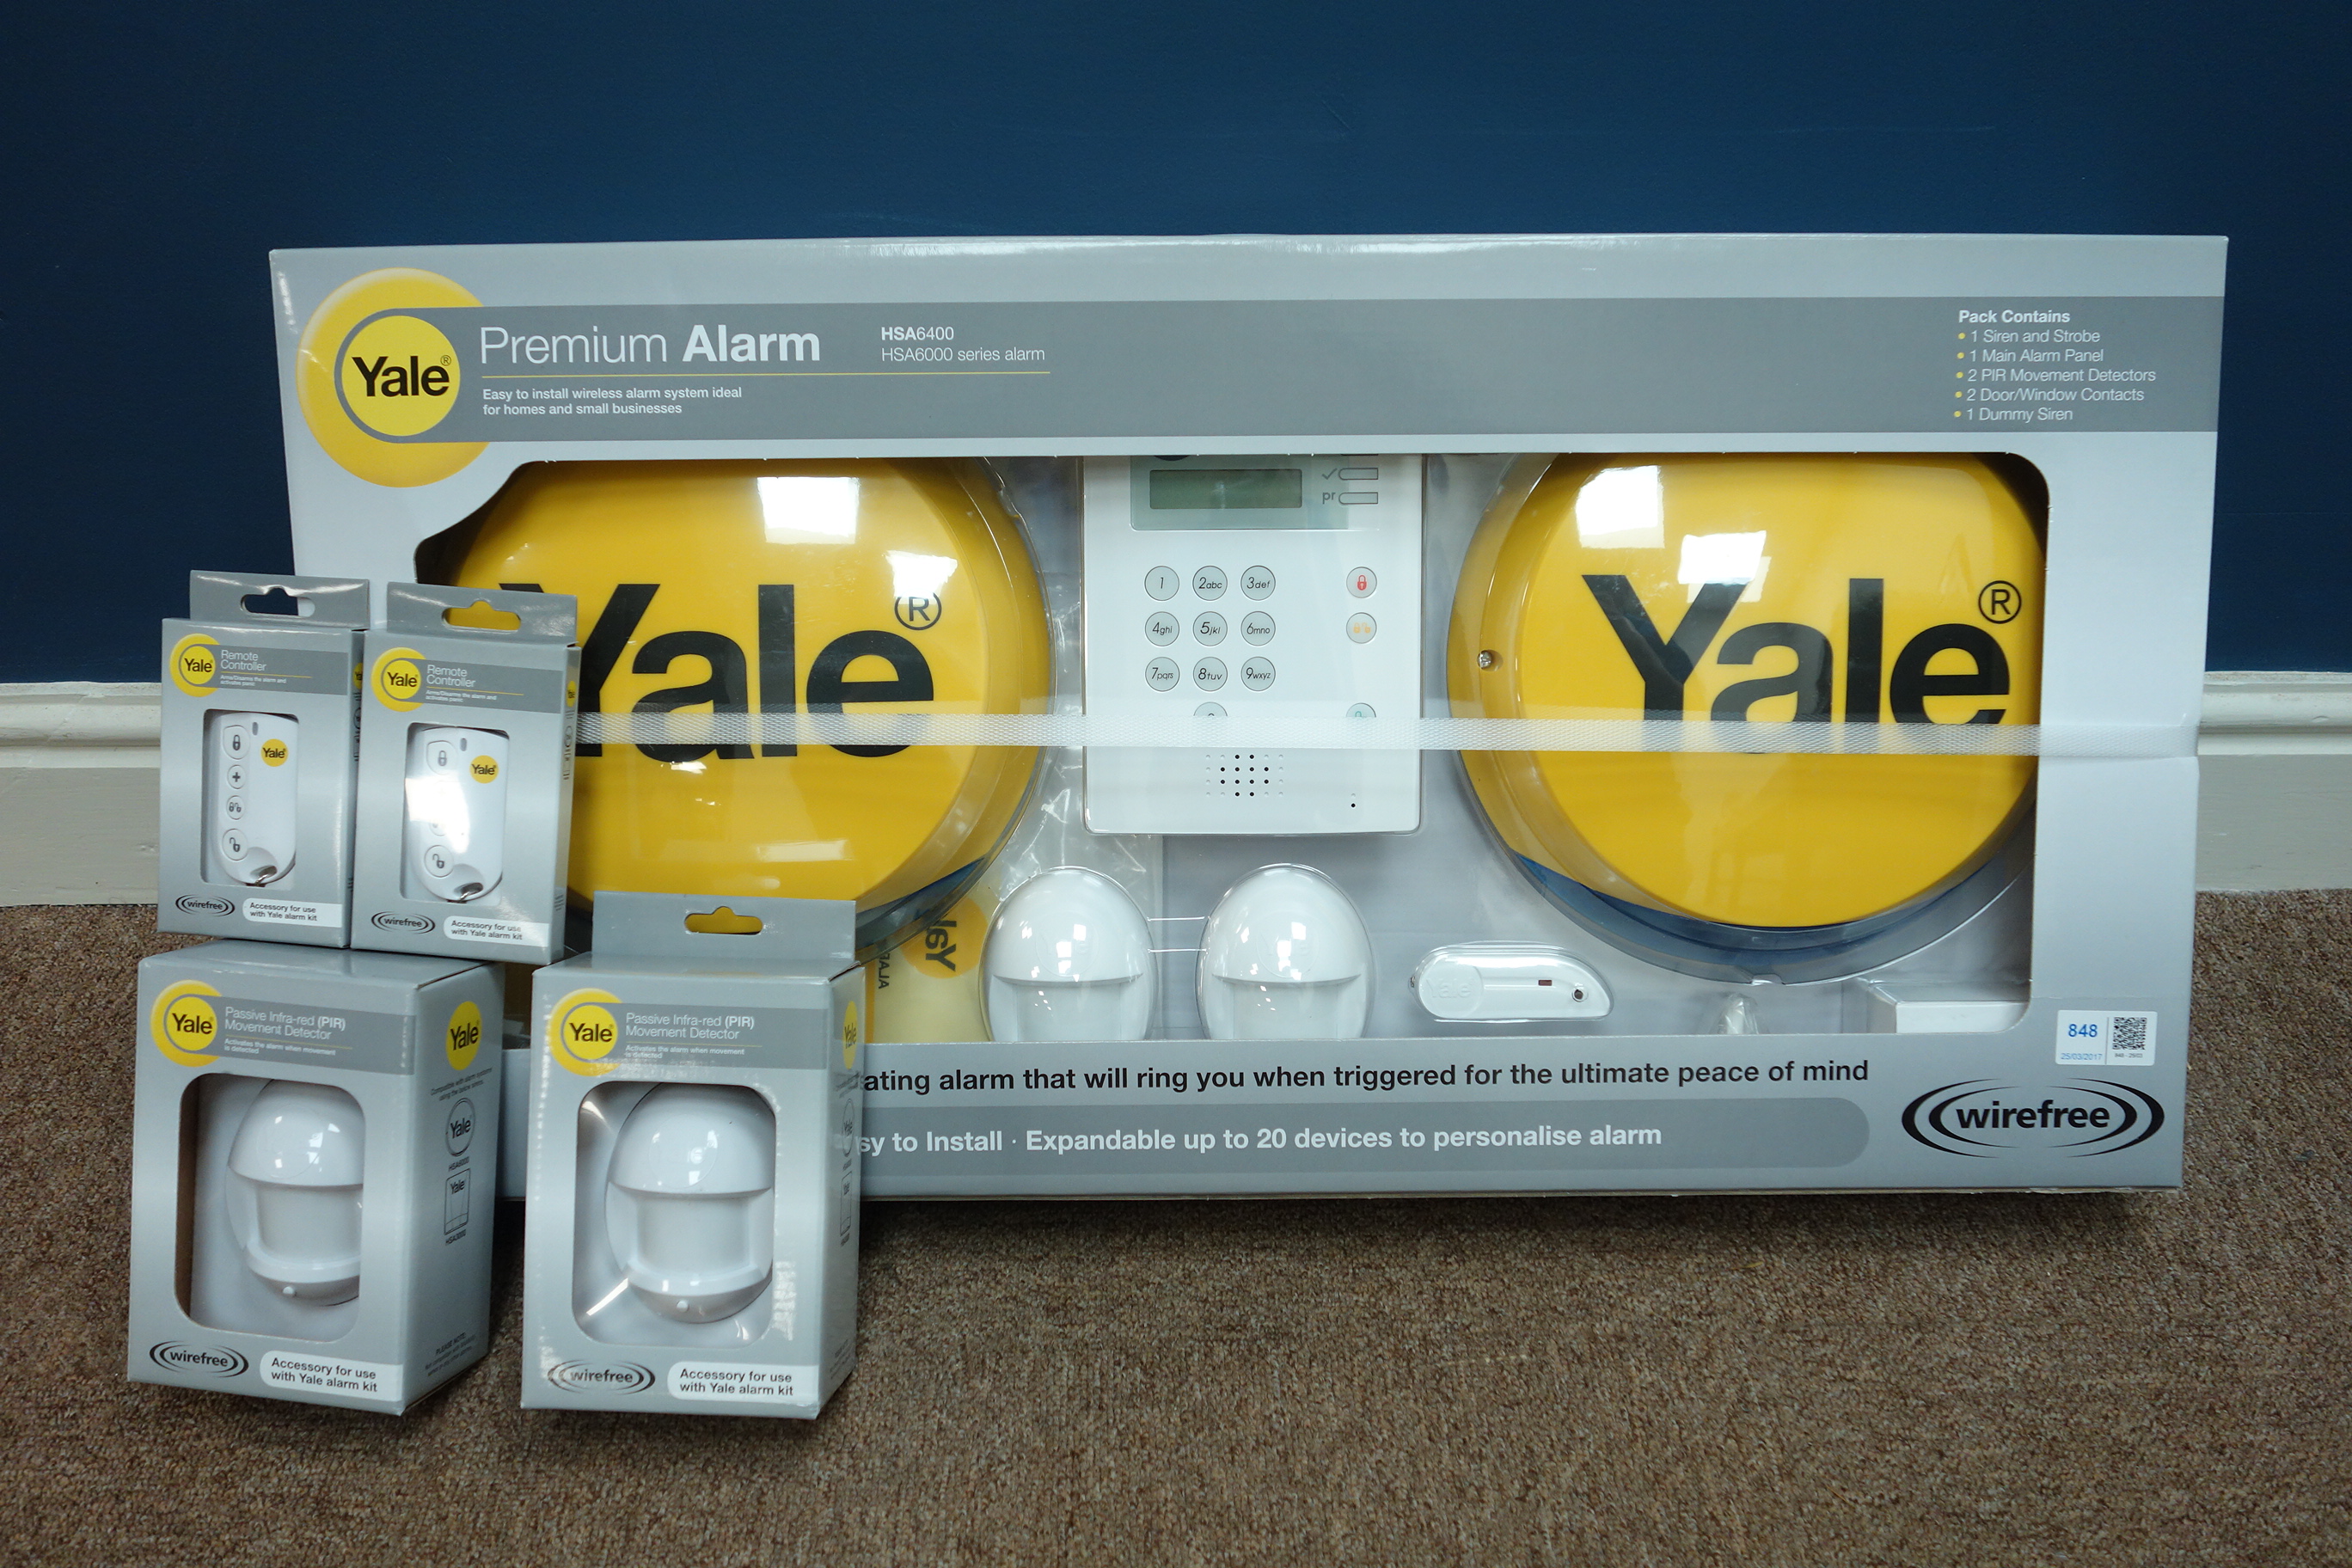 Yale HSA6400 alarm system with two additional motion detectors and remote controllers - boxed